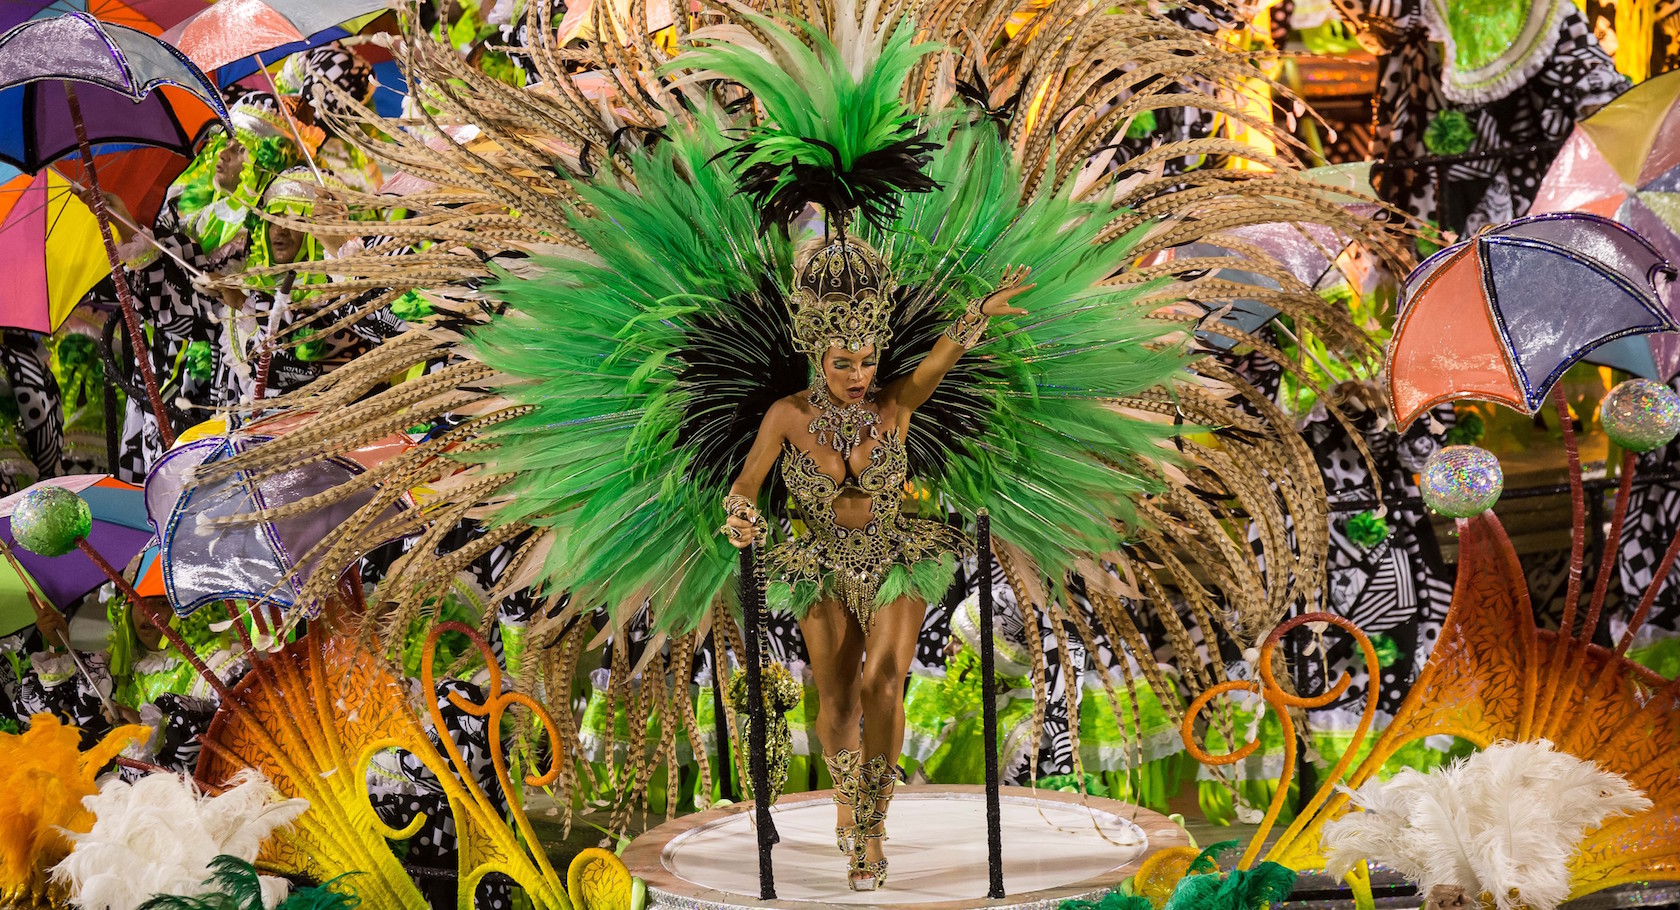 18 Facts About Rio Carnival - Facts.net